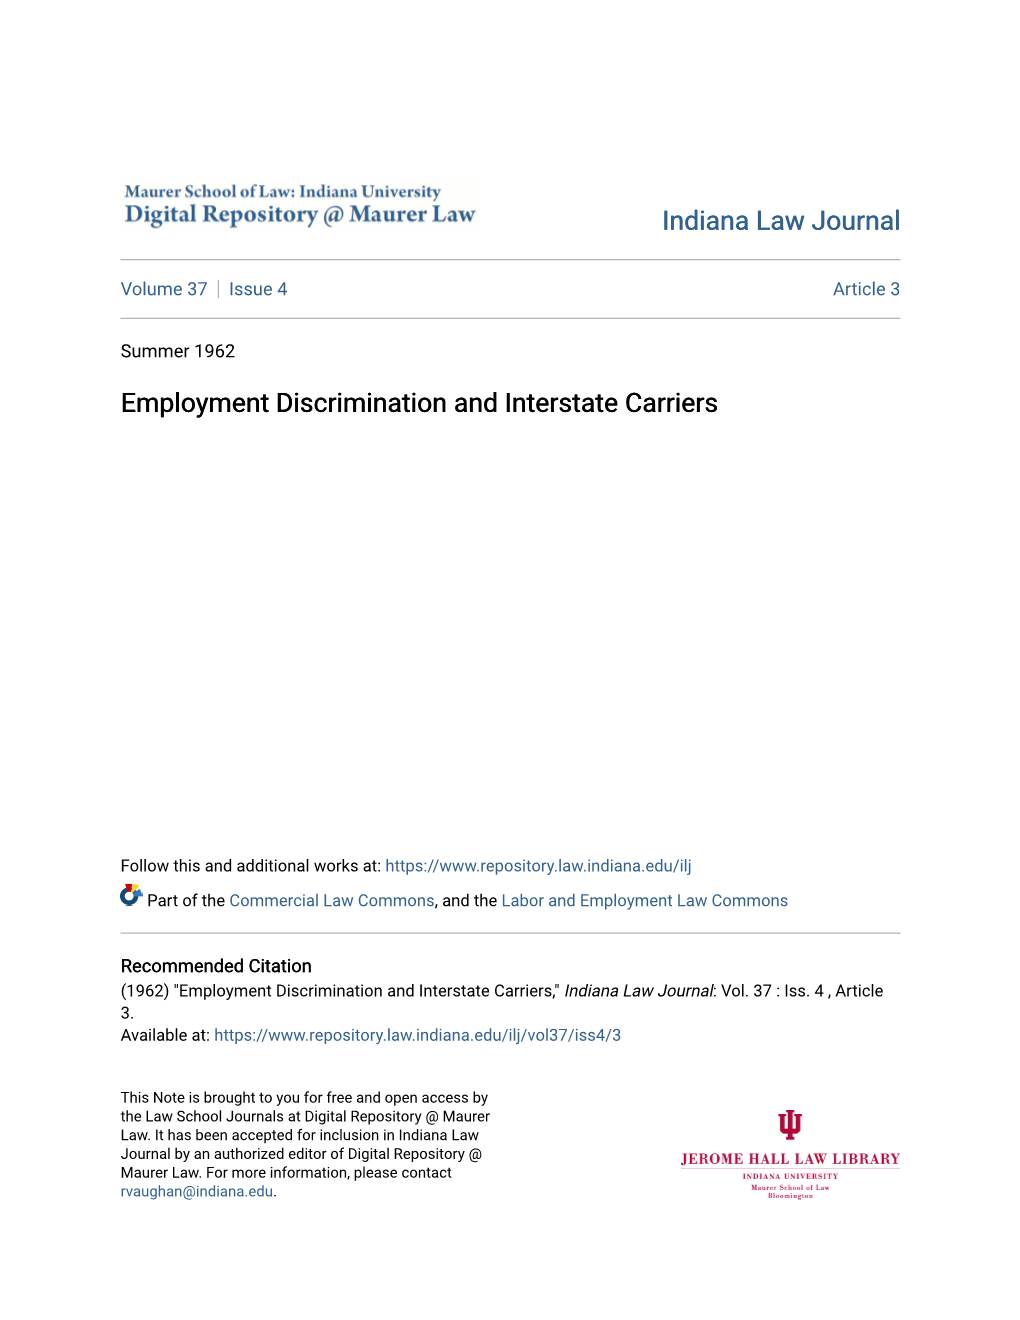 Employment Discrimination and Interstate Carriers